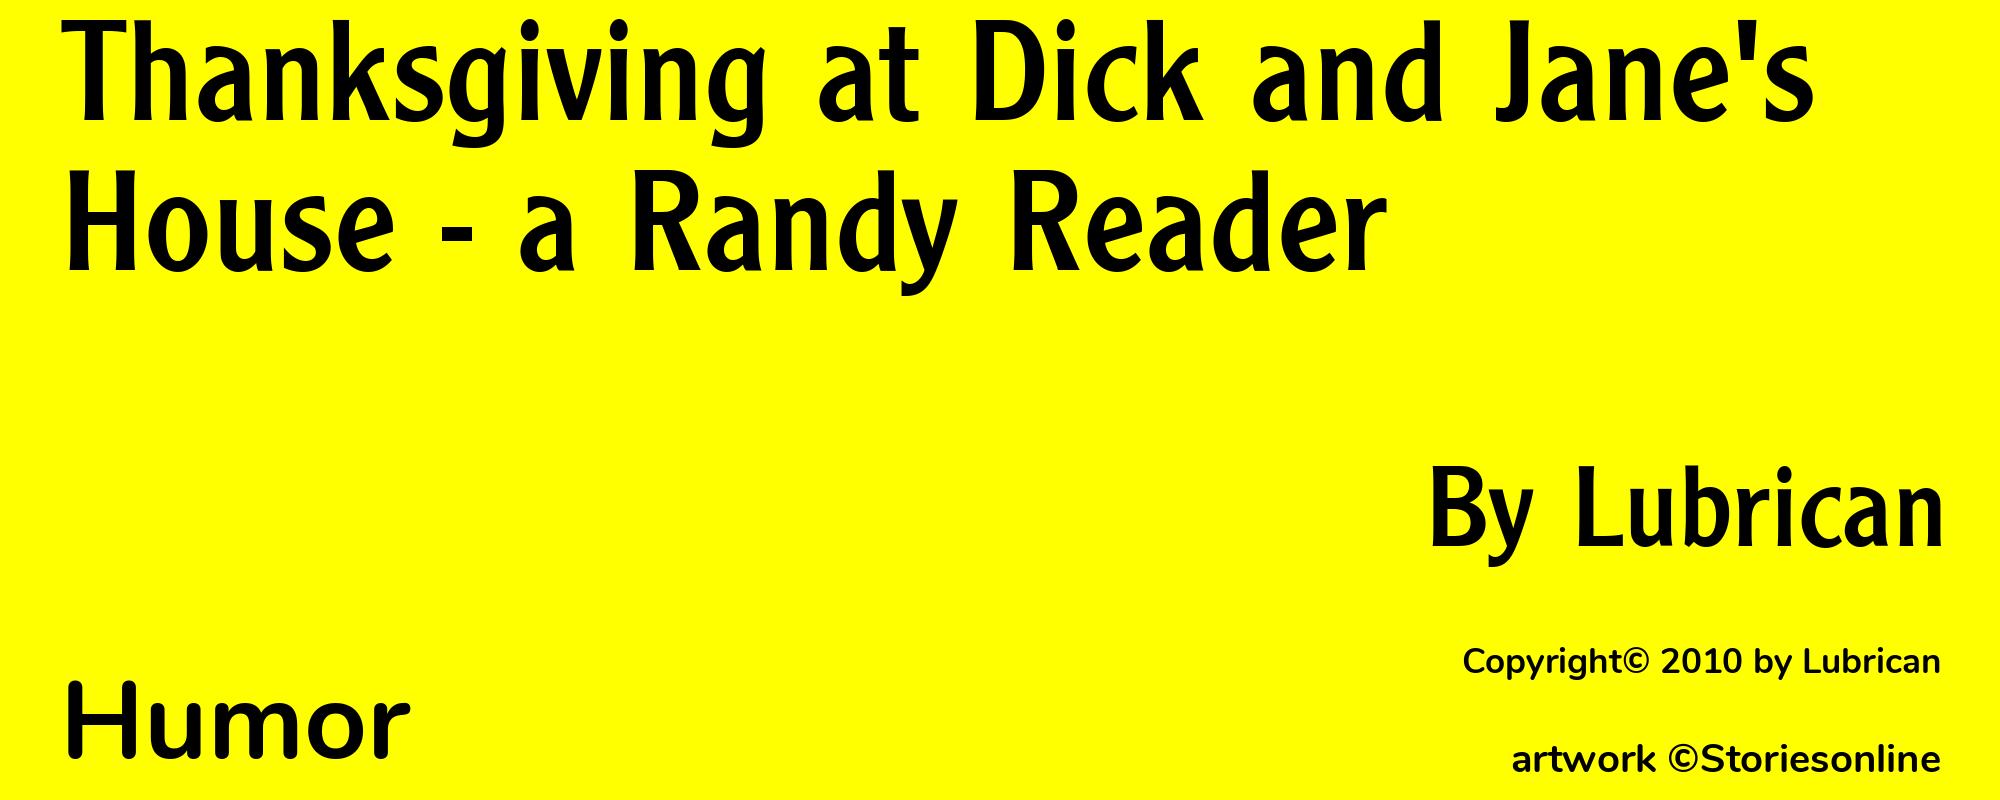 Thanksgiving at Dick and Jane's House - a Randy Reader - Cover